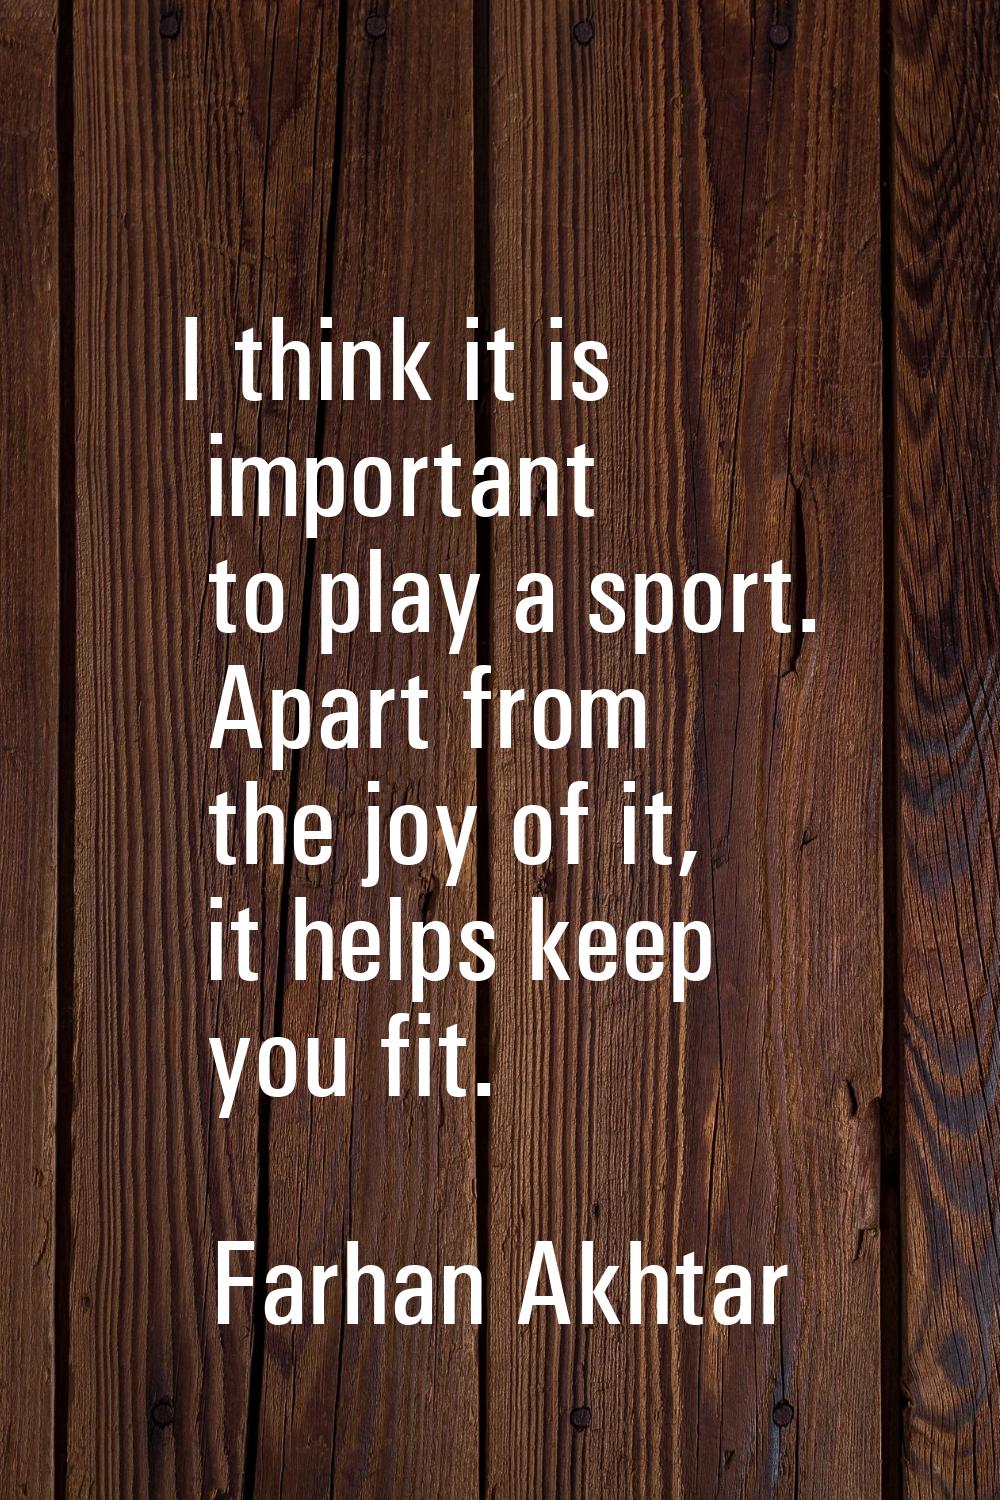 I think it is important to play a sport. Apart from the joy of it, it helps keep you fit.